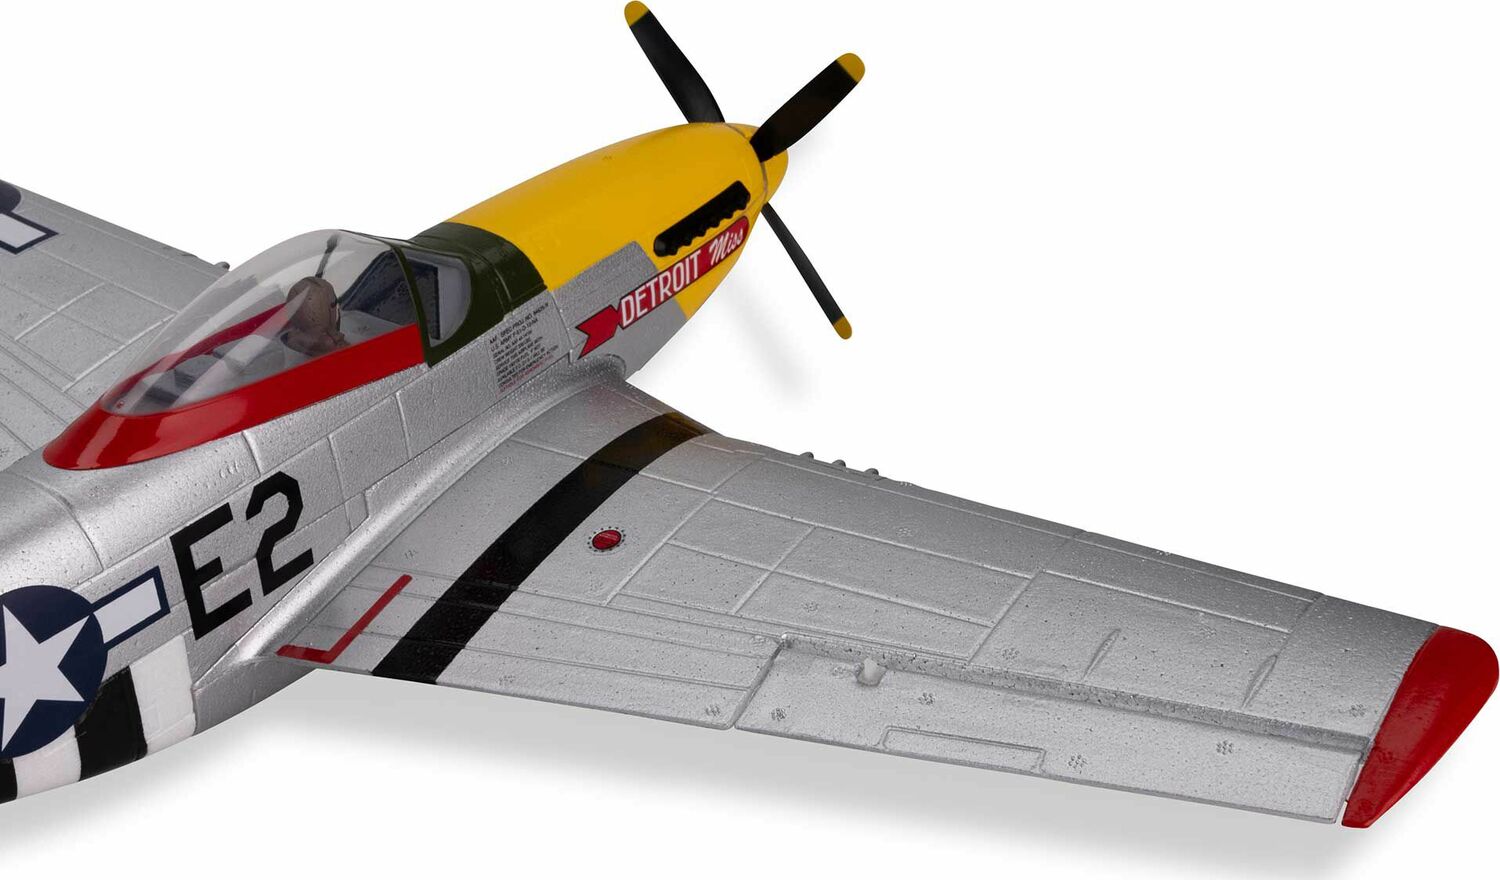 UMX P-51D Mustang “Detroit Miss” BNF Basic with AS3X and SAFE Select